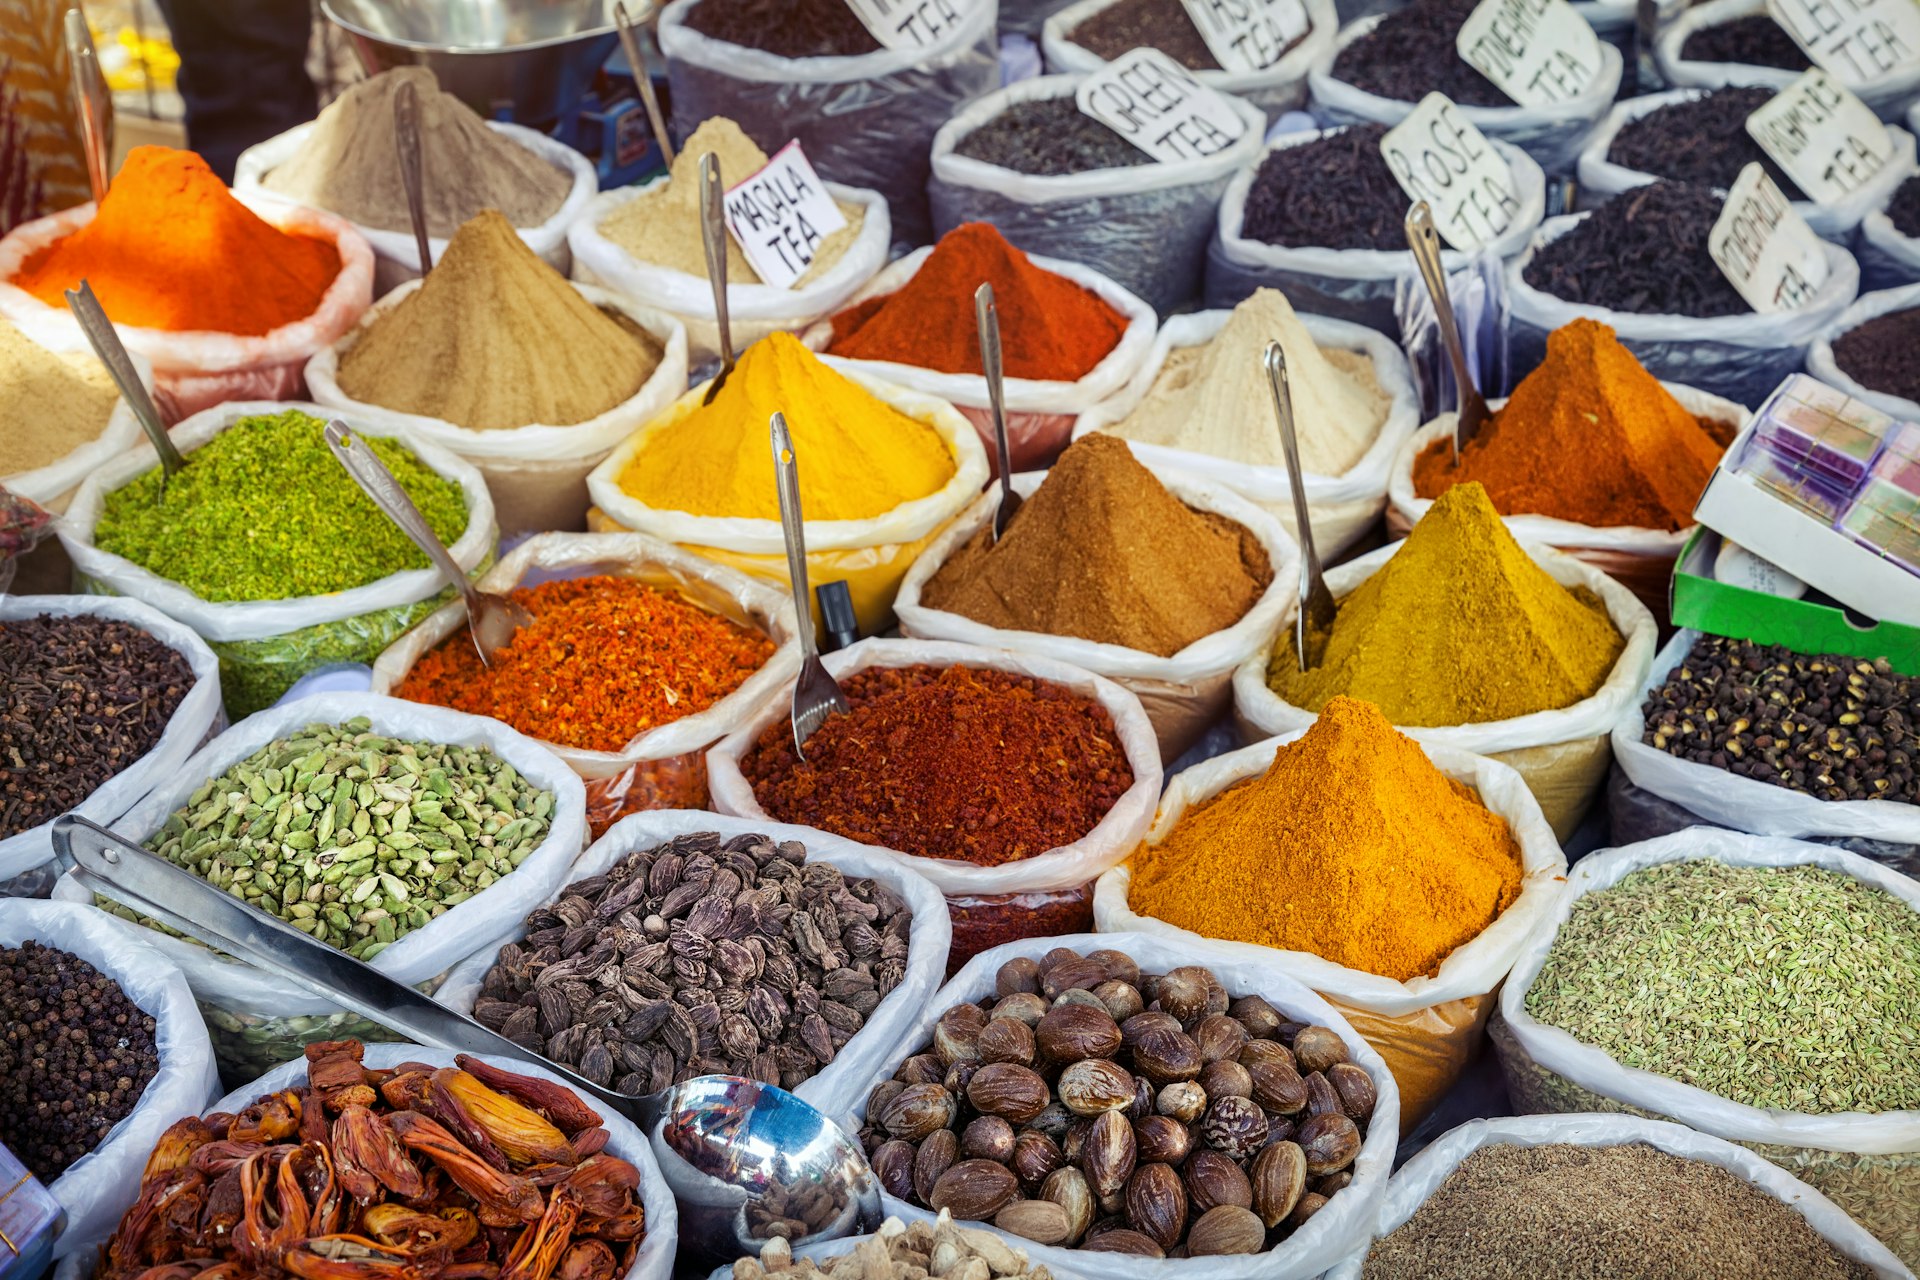 Colourful spices on display at Anjuna flea market in Goa.